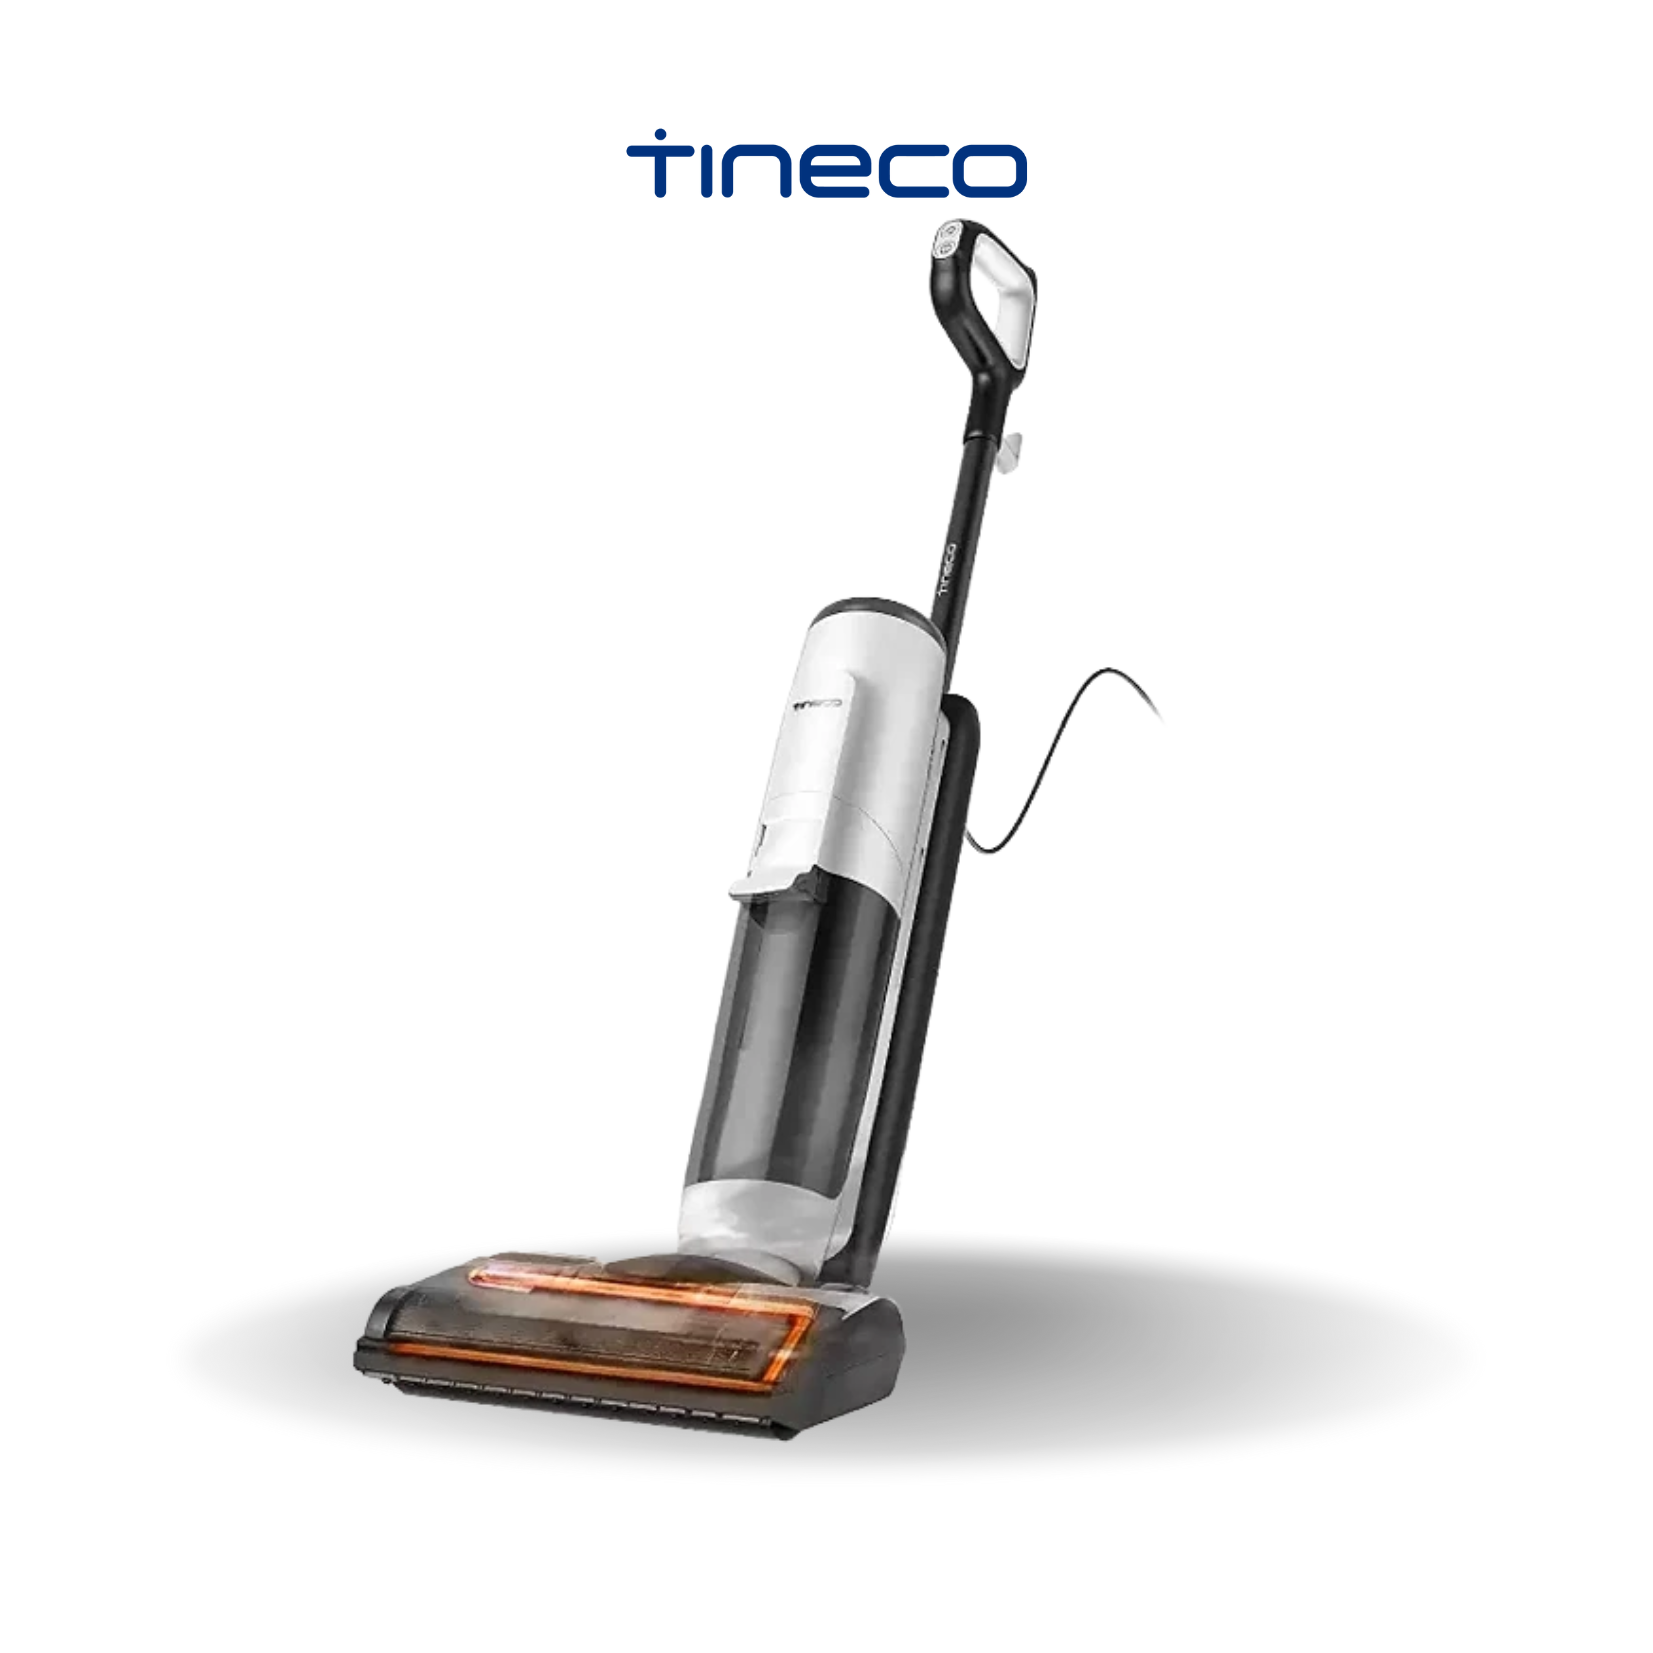 Tineco CARPET ONE Smart Carpet Cleaner and FLOOR ONE S5 Smart Wet